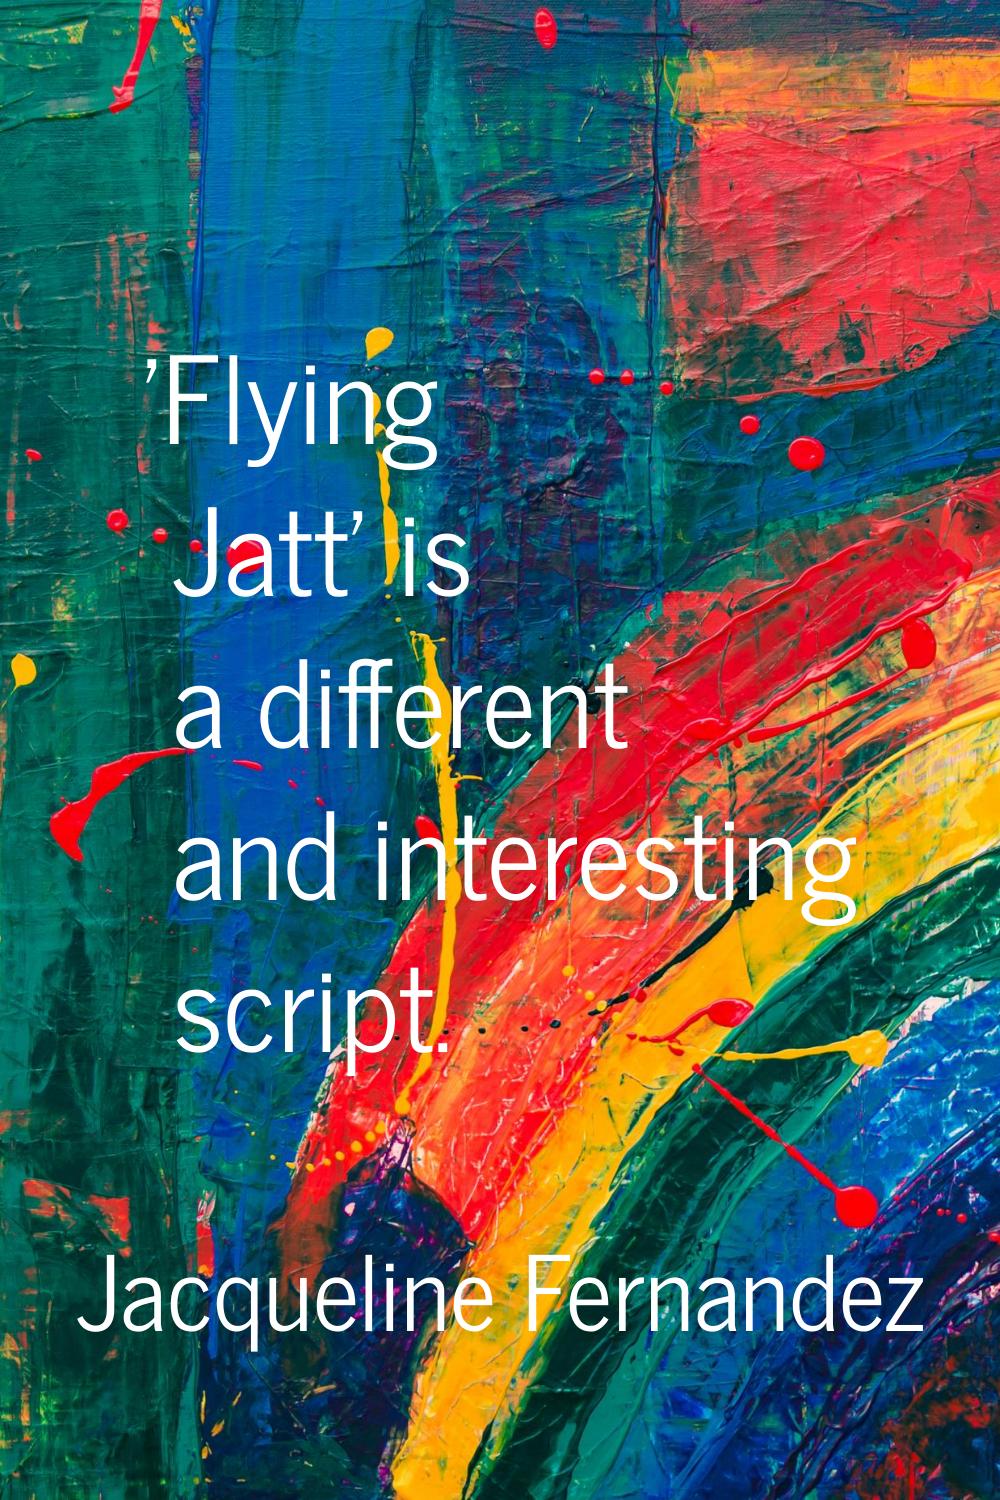 'Flying Jatt' is a different and interesting script.